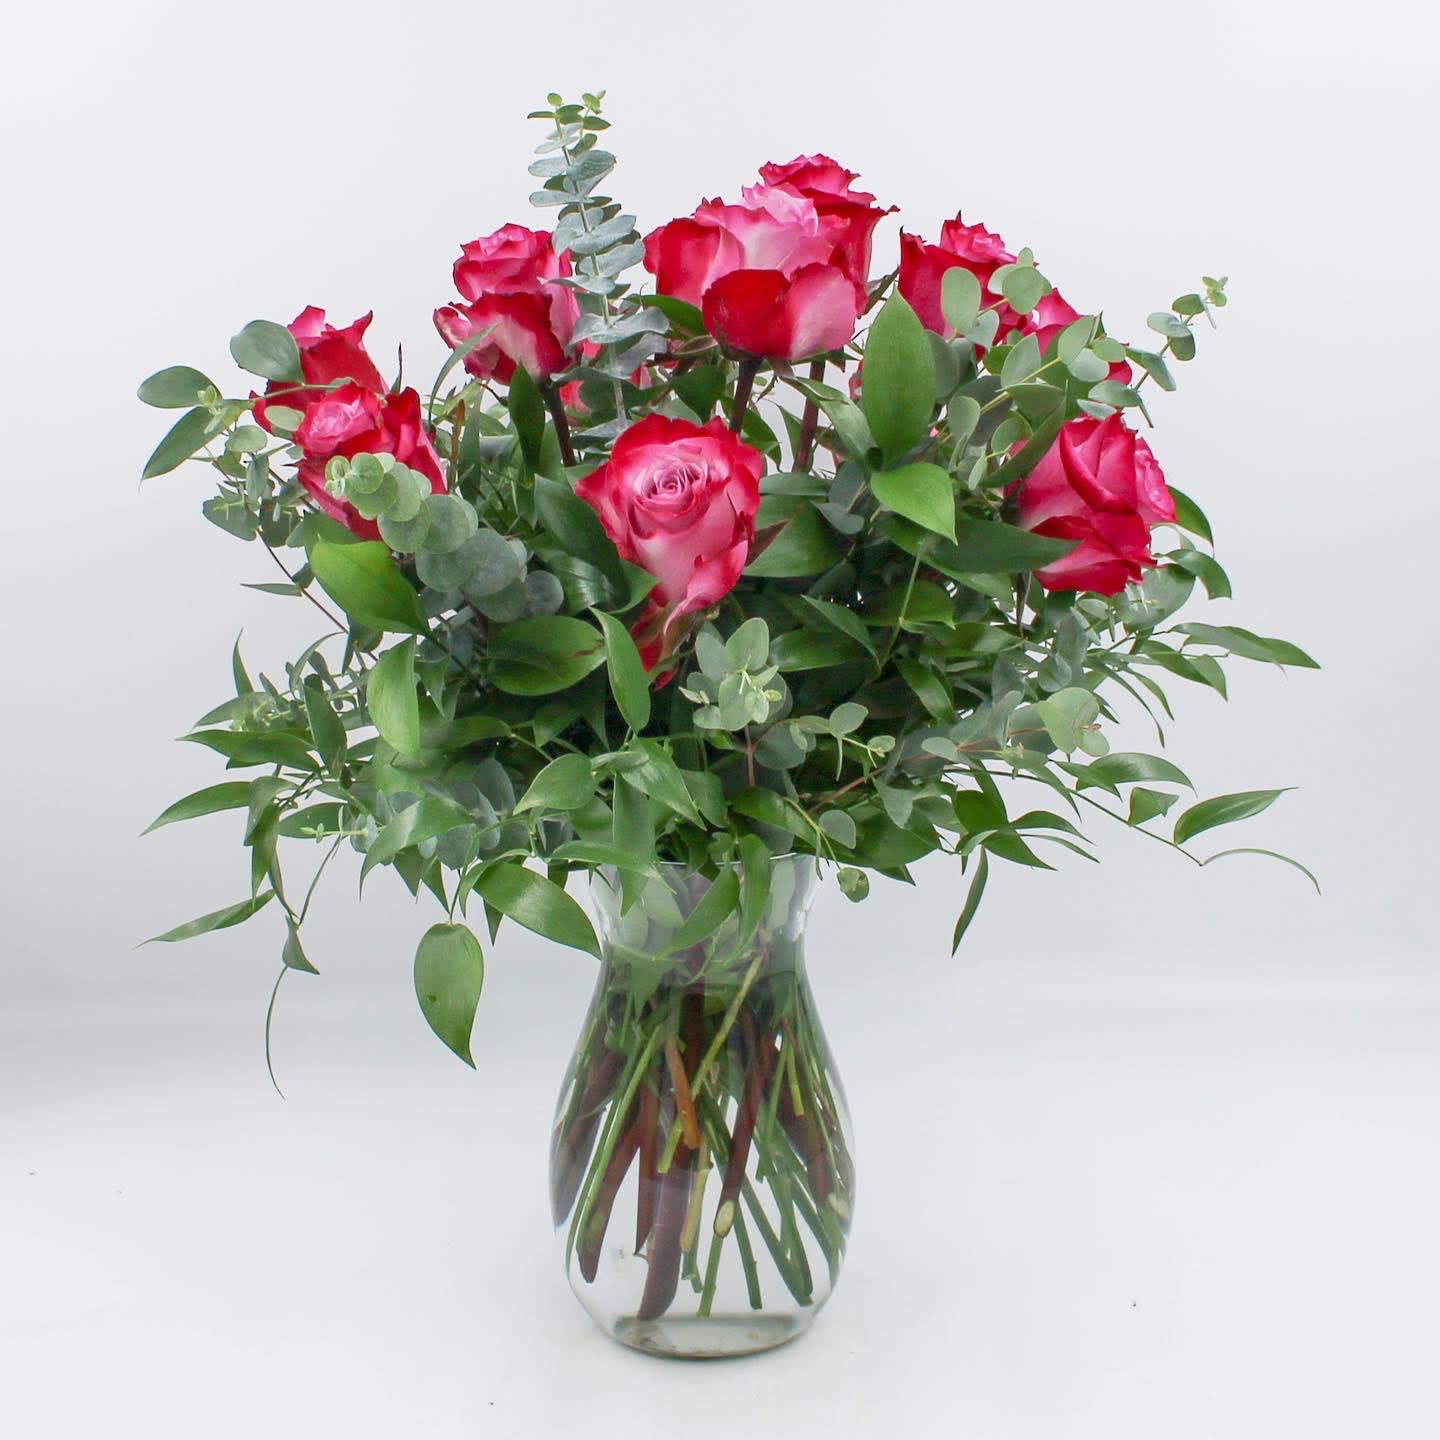 Dozen Deep Purple Roses - Deep Purple Roses are a gorgeous Lavender with Hot Pink tips. The Standard Dozen has Leatherleaf and Babies Breath and the Deluxe Dozen uses upscale greenery like Italian Ruscus, Israeli Ruscus and mixed Eucalyptus and is pictured.